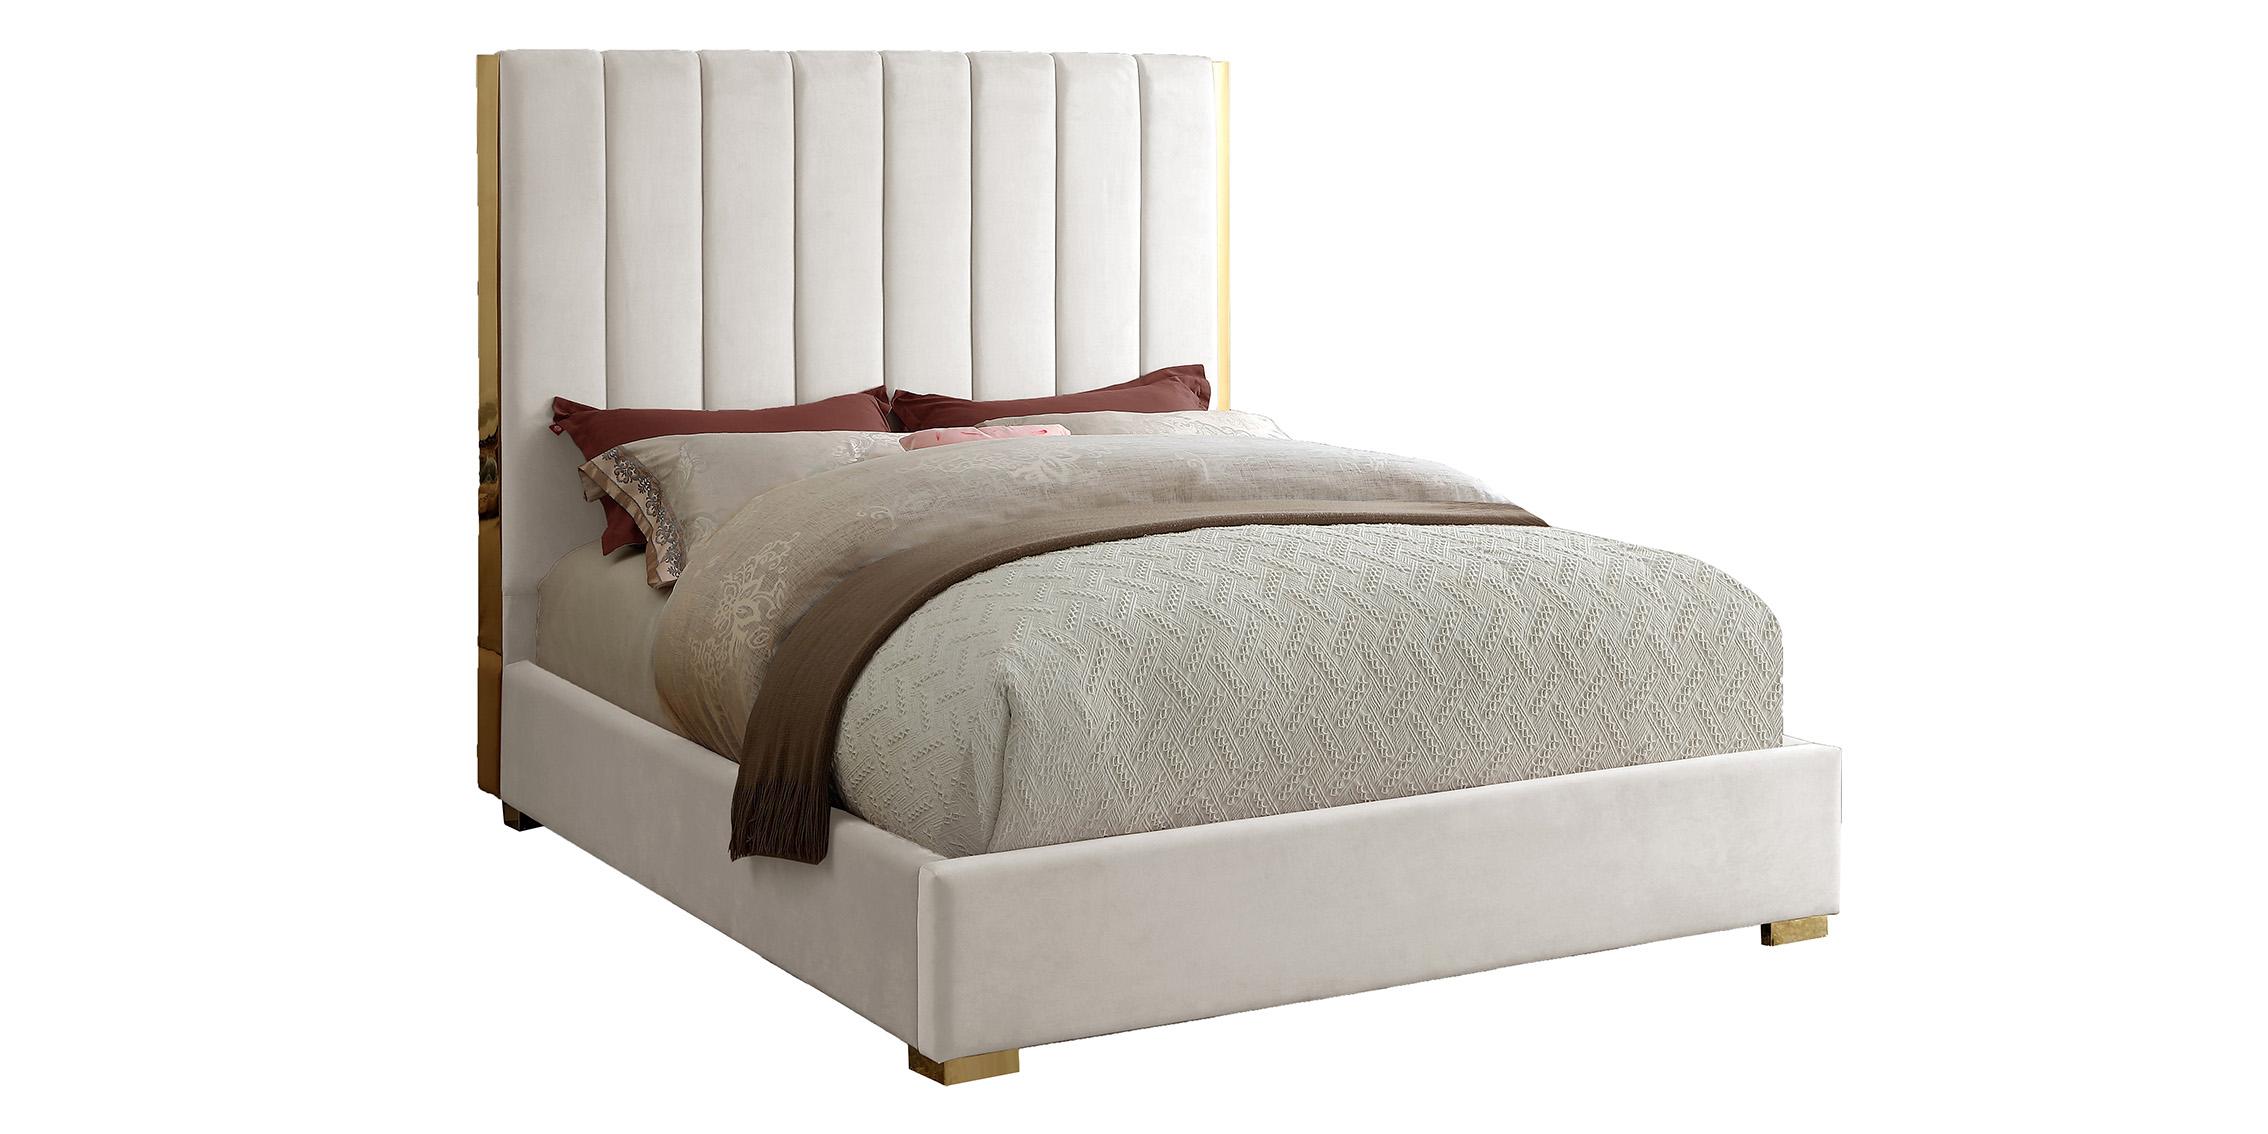 

    
Cream Velvet Channel Tufting Queen Bed BECCA Meridian Modern Contemporary
